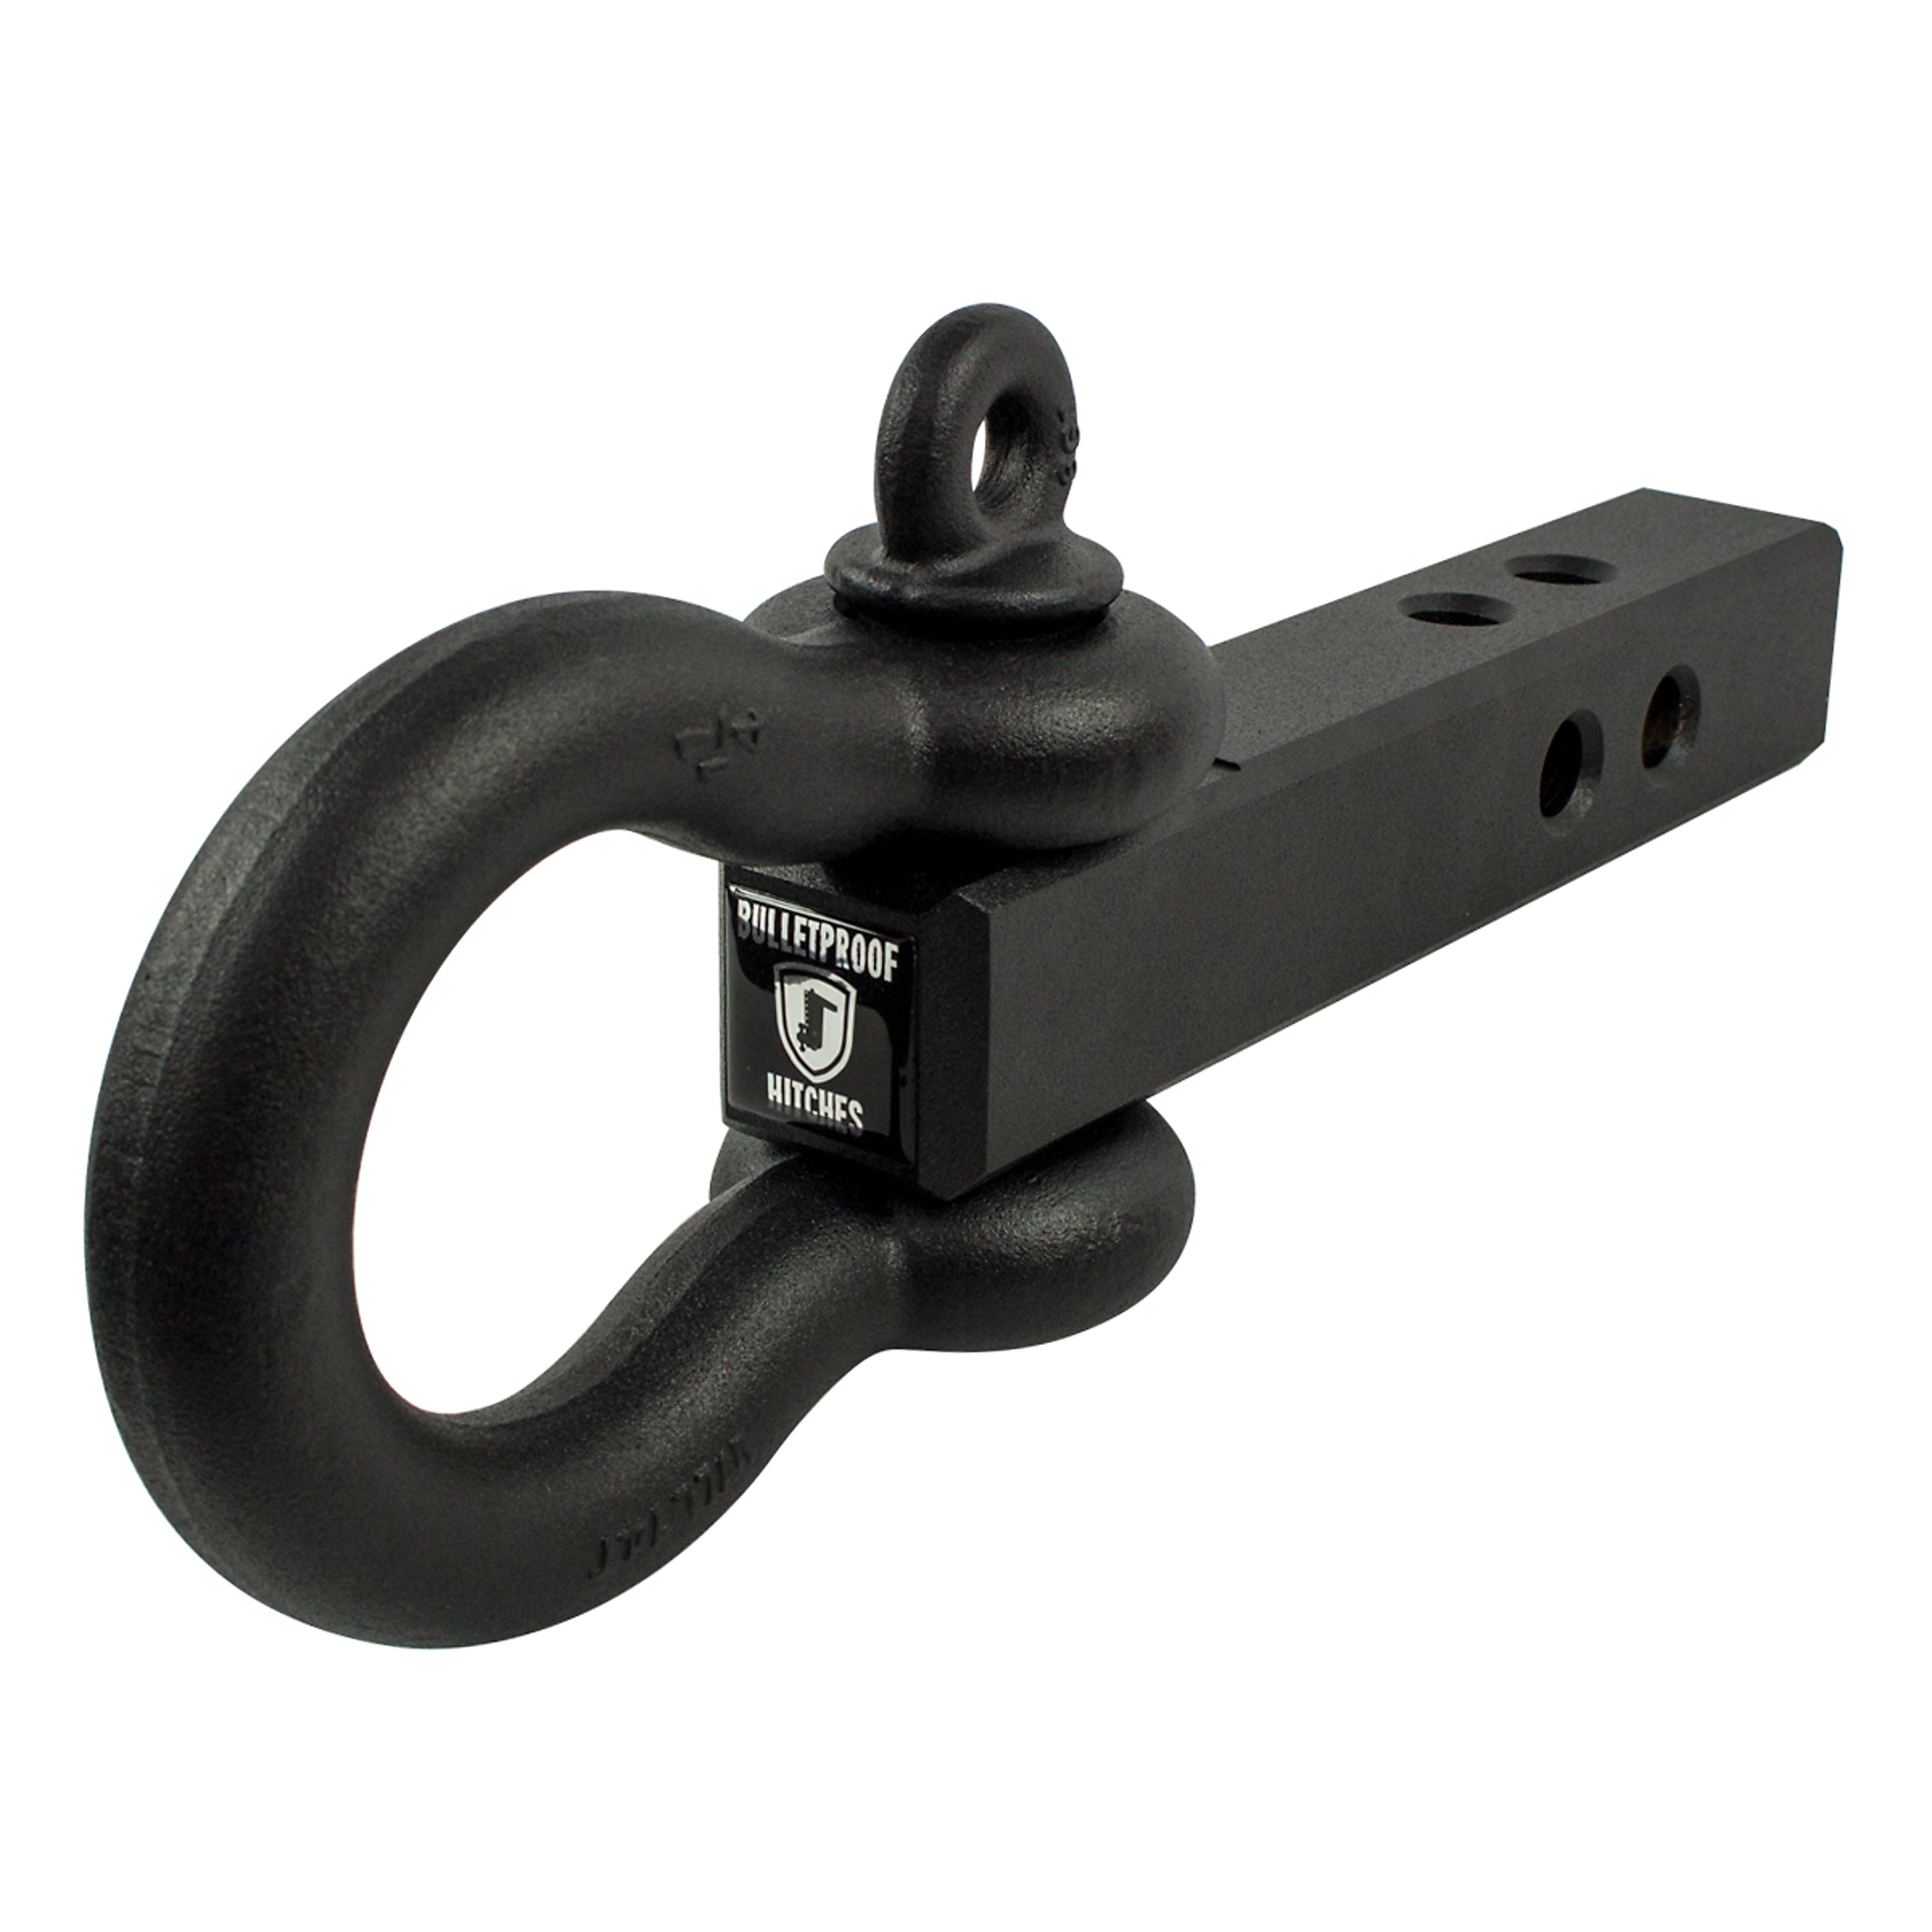 BulletProof Hitches, 2.0Inch EXTREME DUTY RECEIVER SHACKLE, Fits Receiver Size 2 in, Model ED20SHACKLE